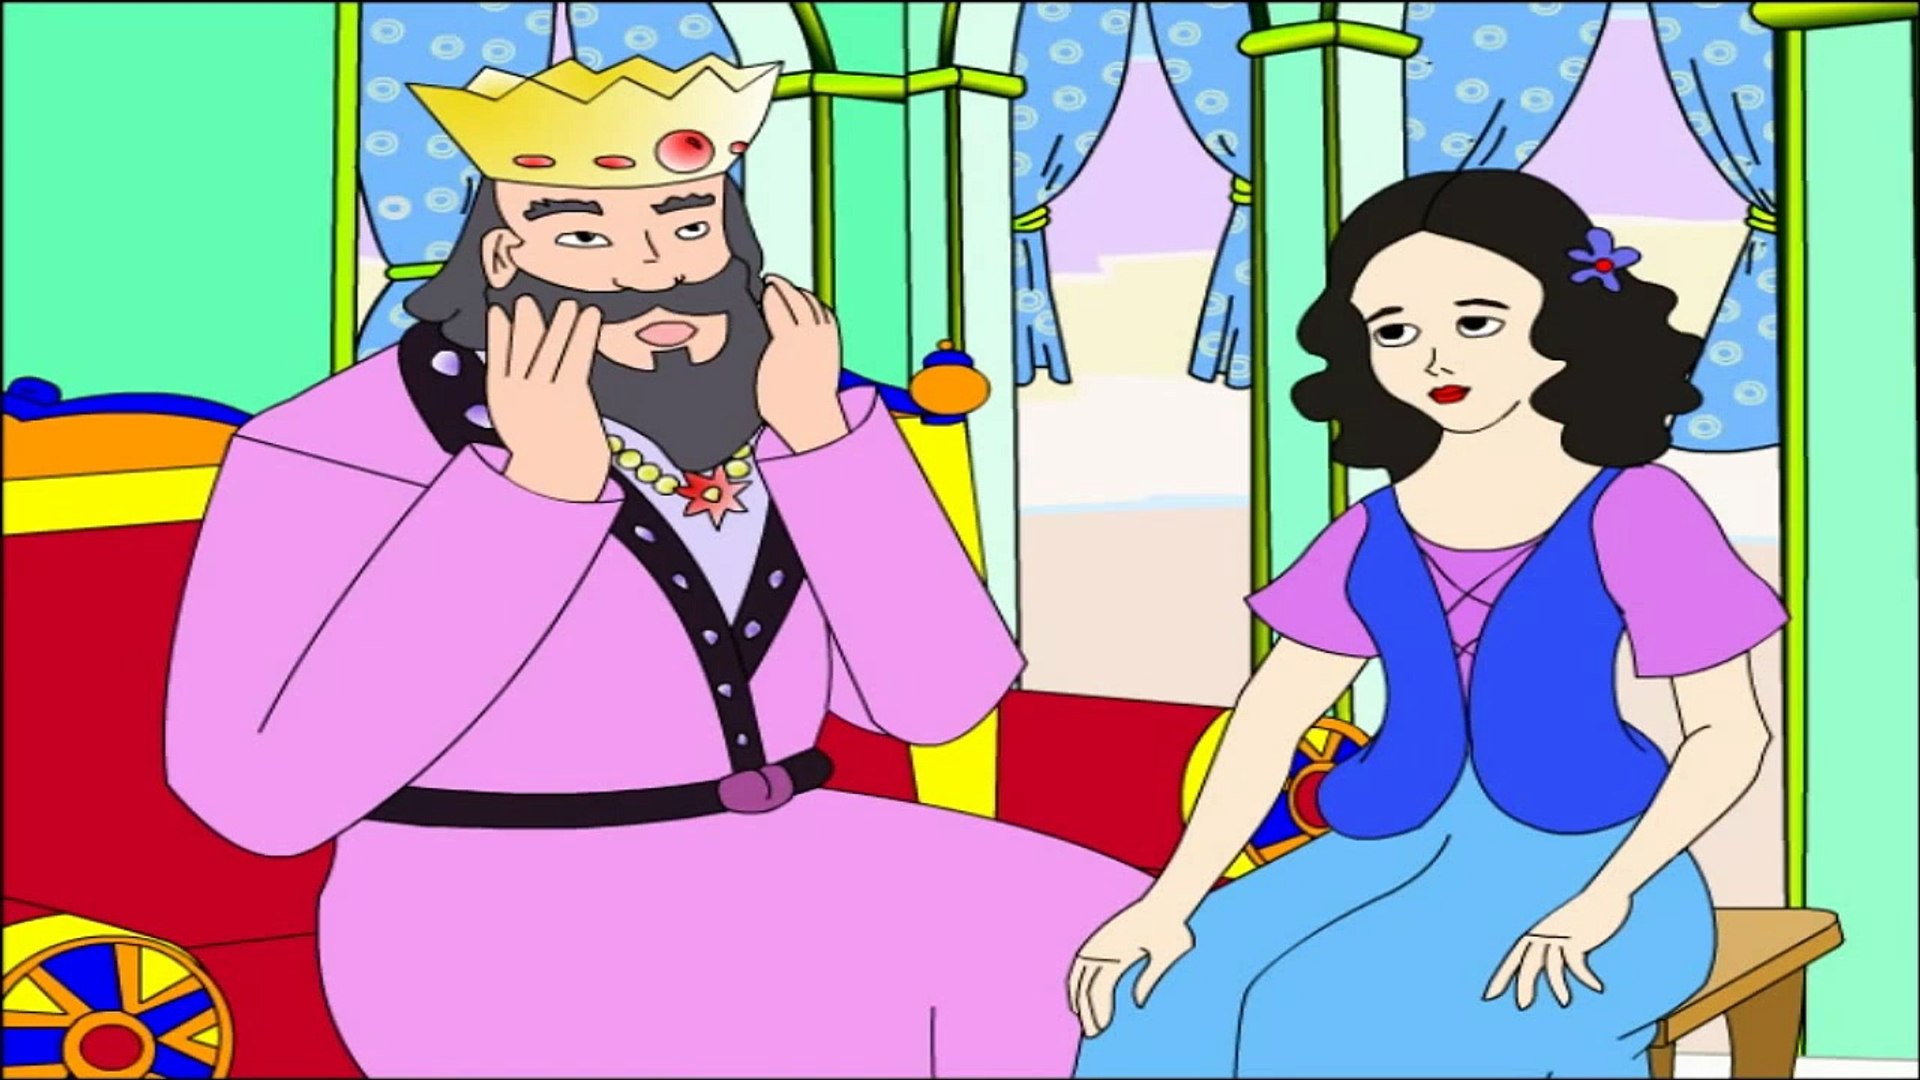 Snowwhite & The Seven Dwarfs ## Fairy Tales - Fasinated Animation For Kids Education